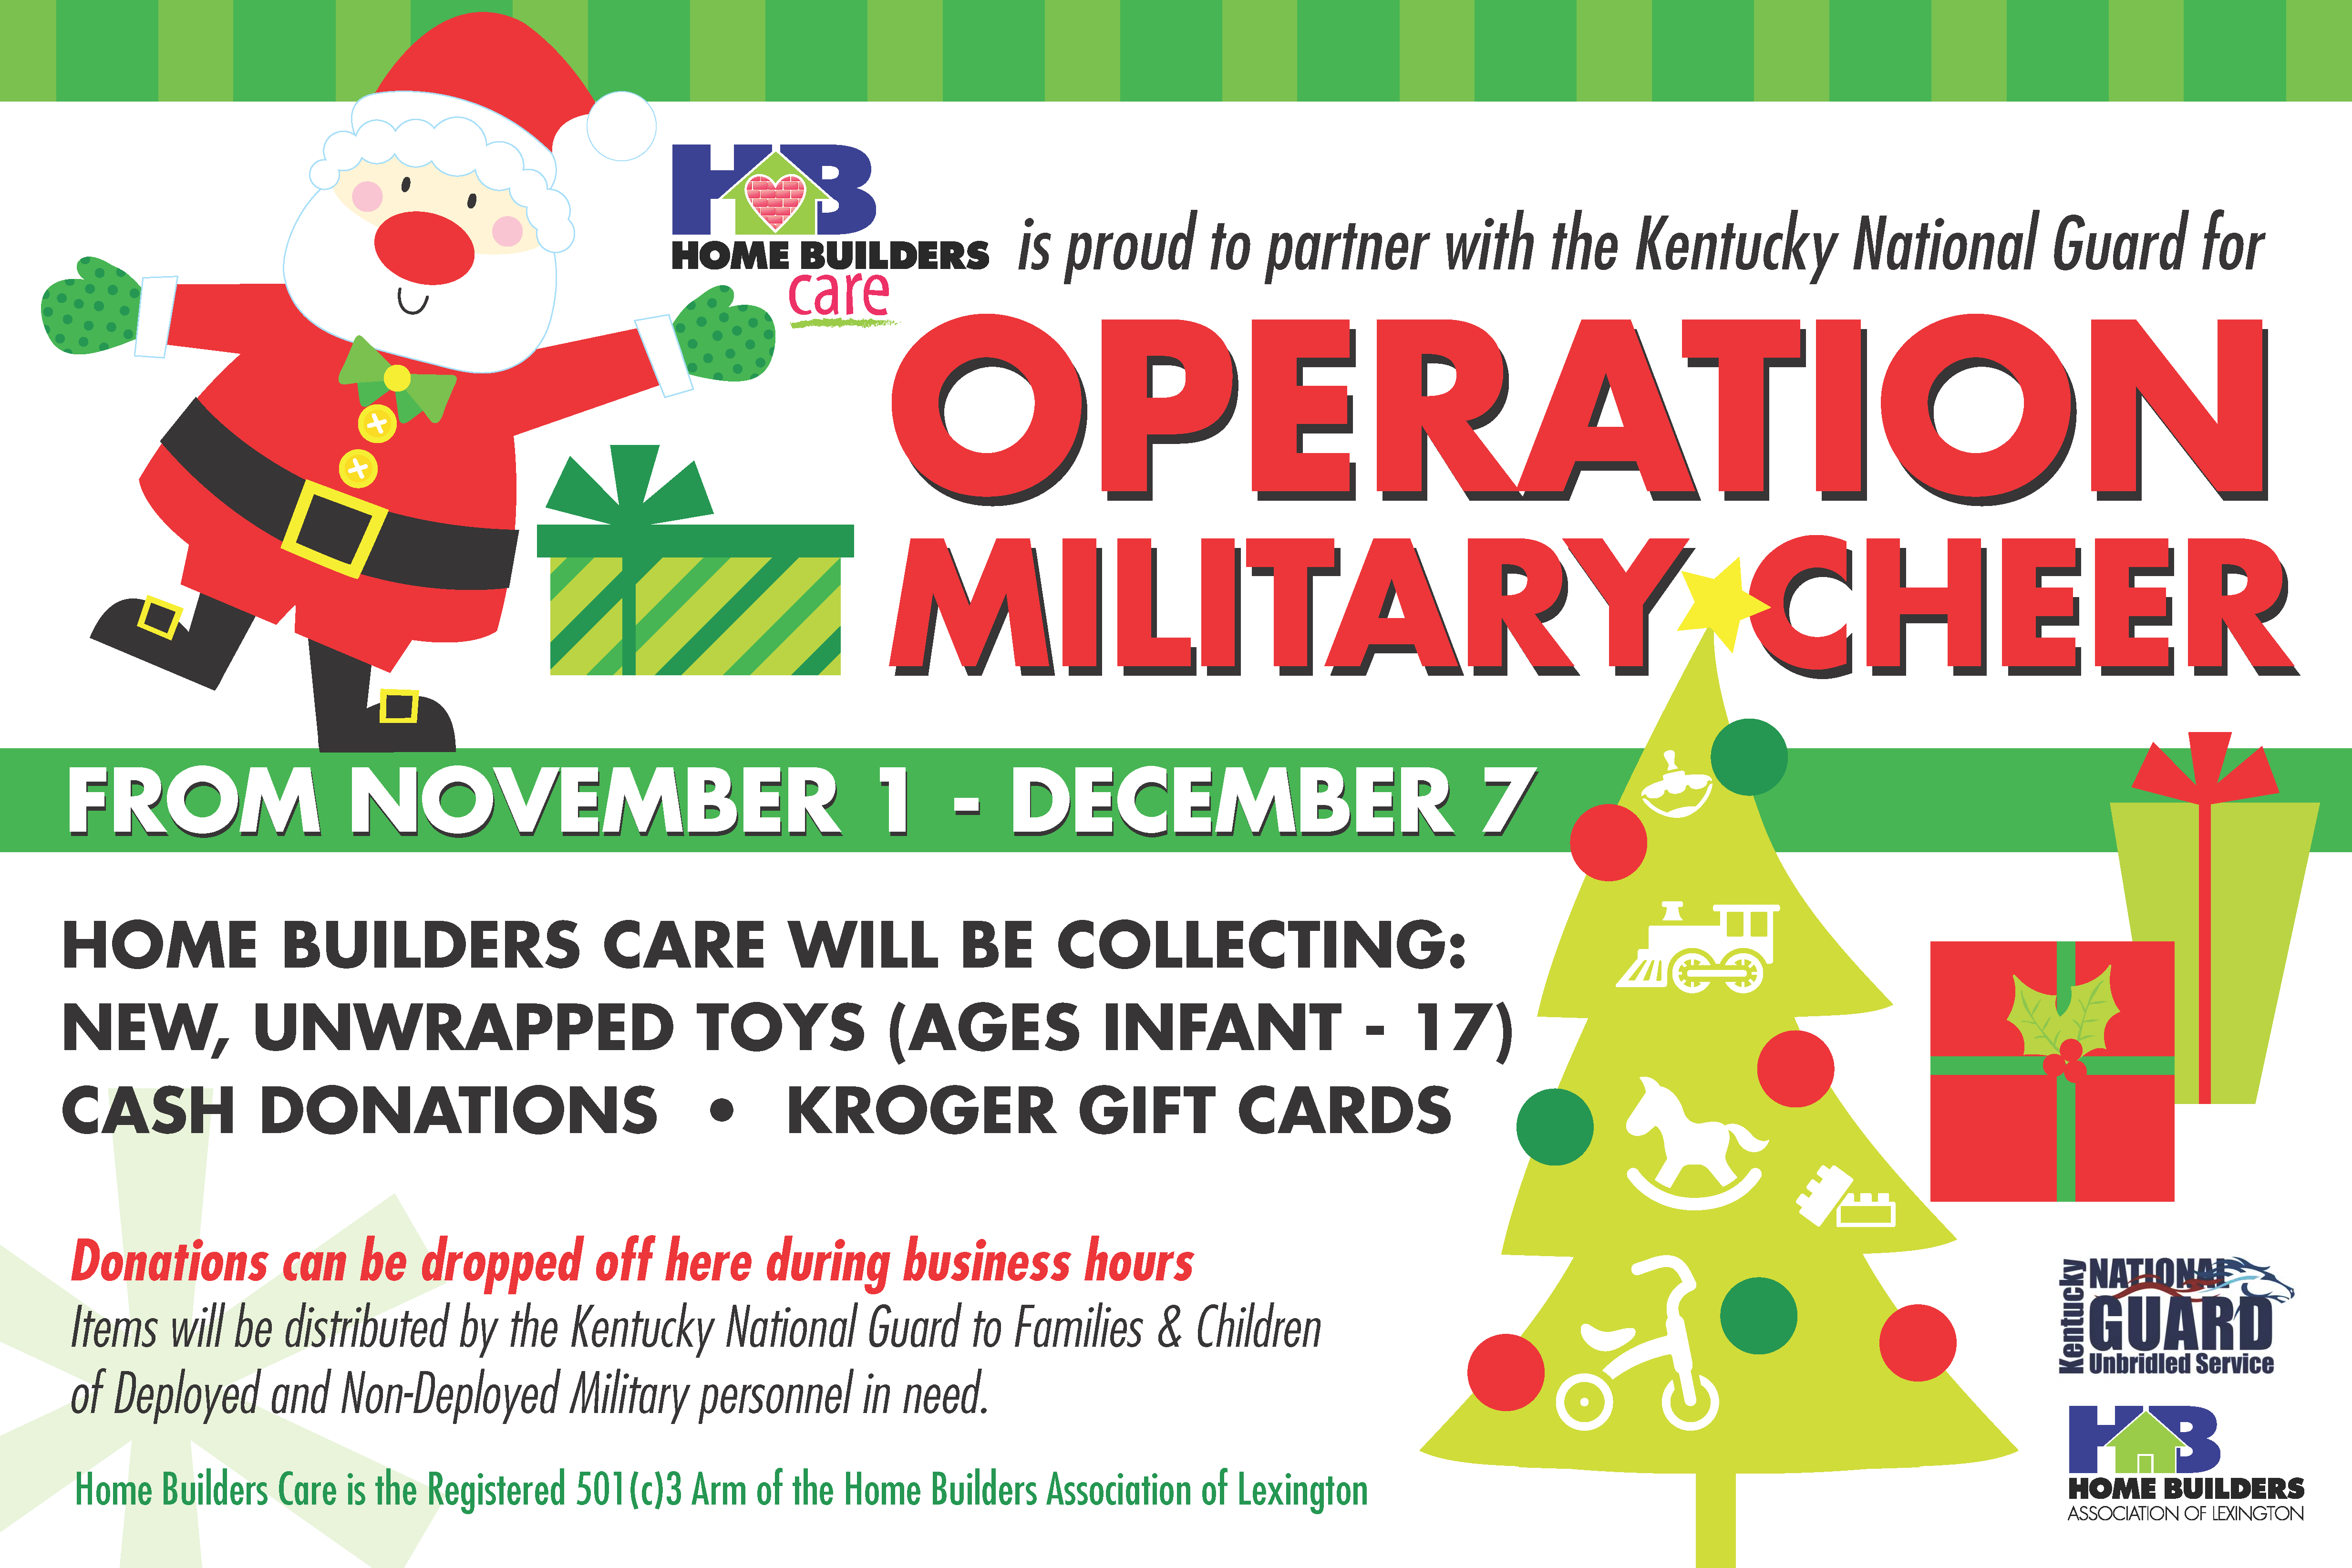 Home Builders Care - Operation Military Cheer